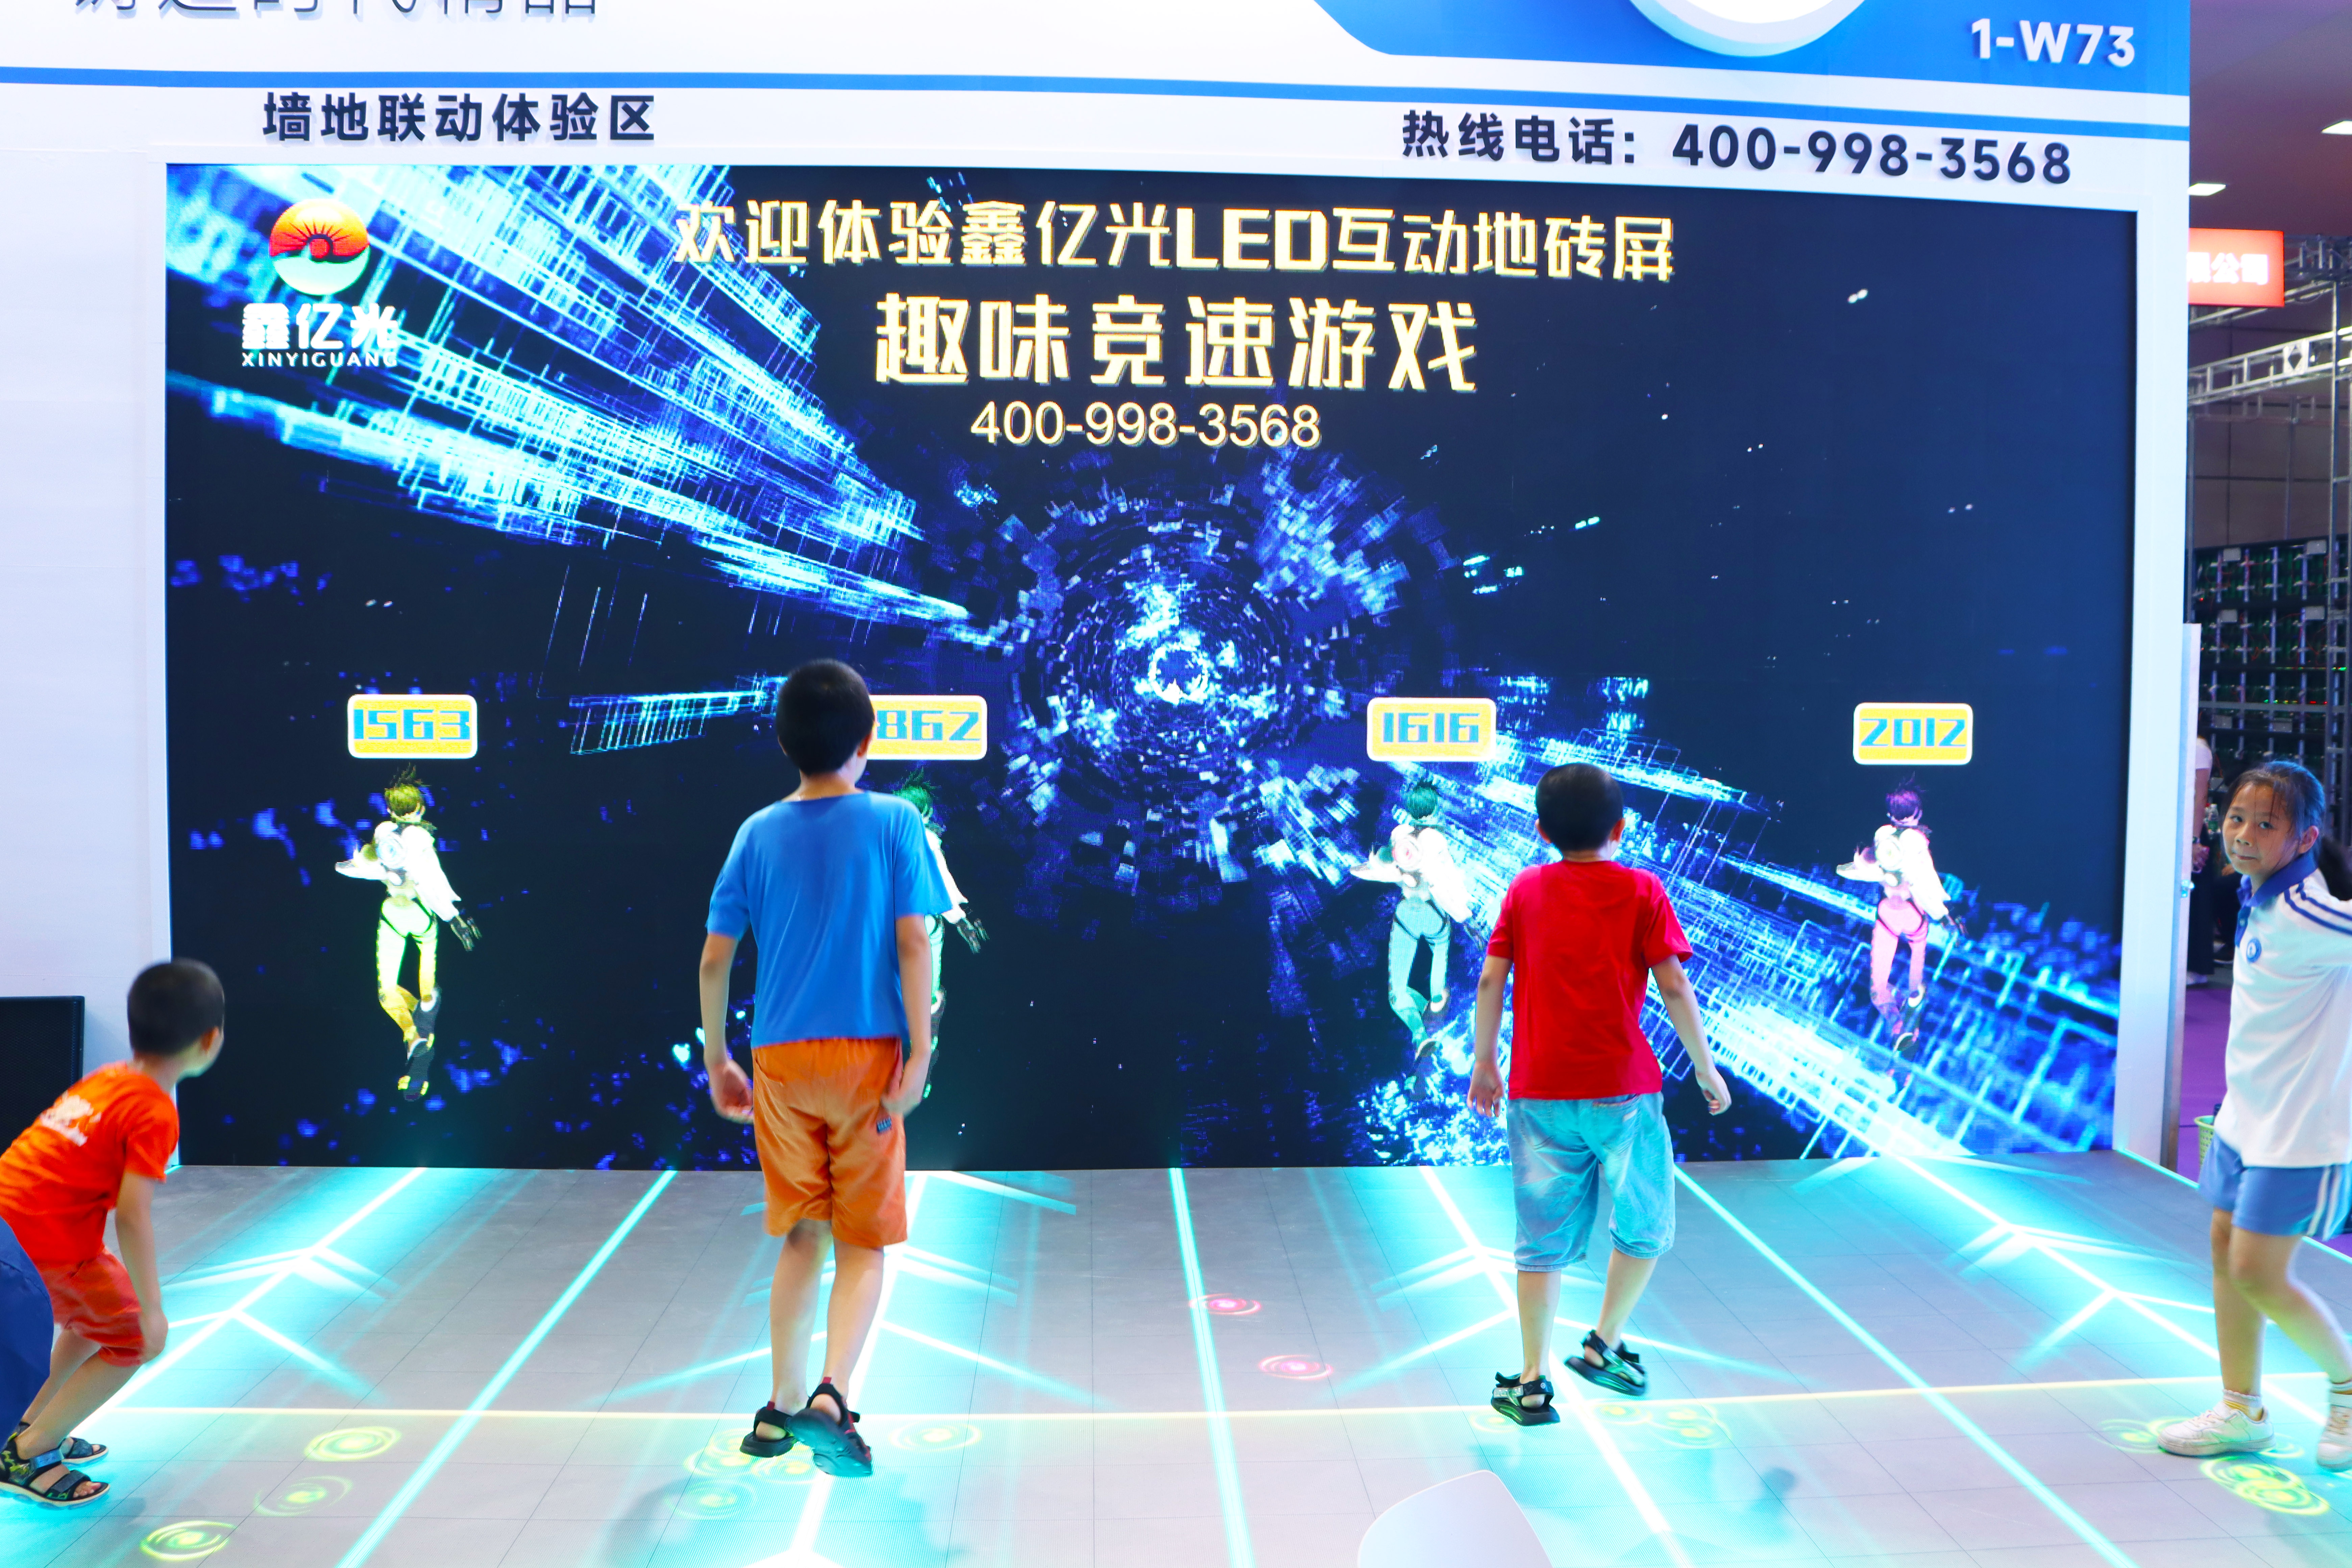 https://www.xygledscreen.com/news/wonderful-review-of-shenzhen-beijing-exhibition-xygled-led-intelligent-interactive-floor-screen-empowers-diversified-scene-applications/